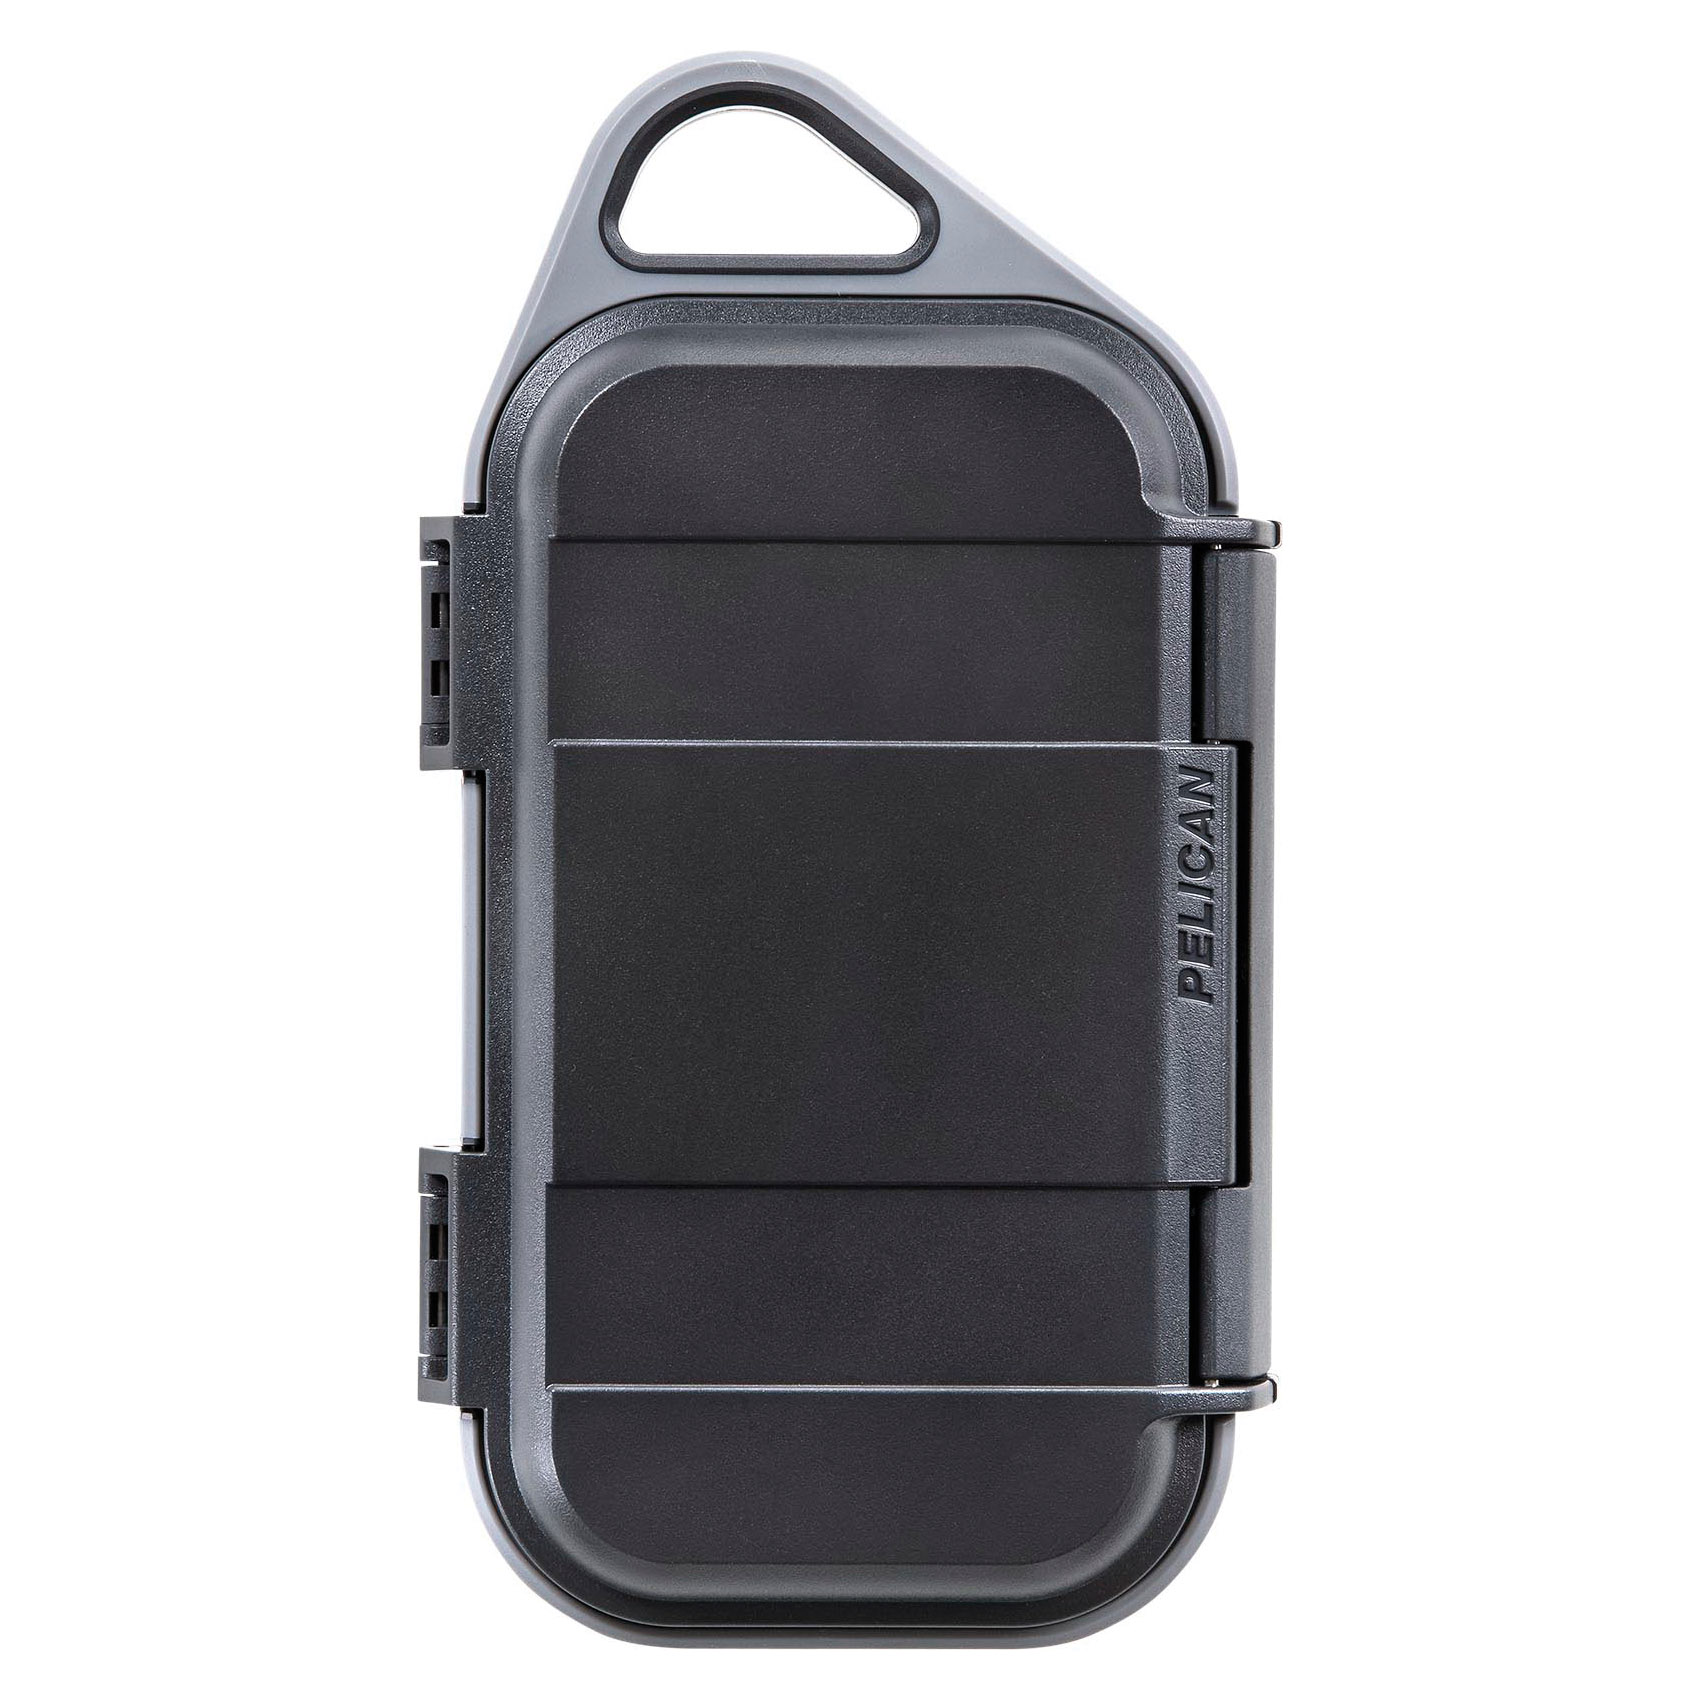 Pelican G40 Series GOG400-DGRY Personal Utility Case, ABS, Anthracite/Gray, For: iPhone Xs Max, Samsung Note 9 - 3